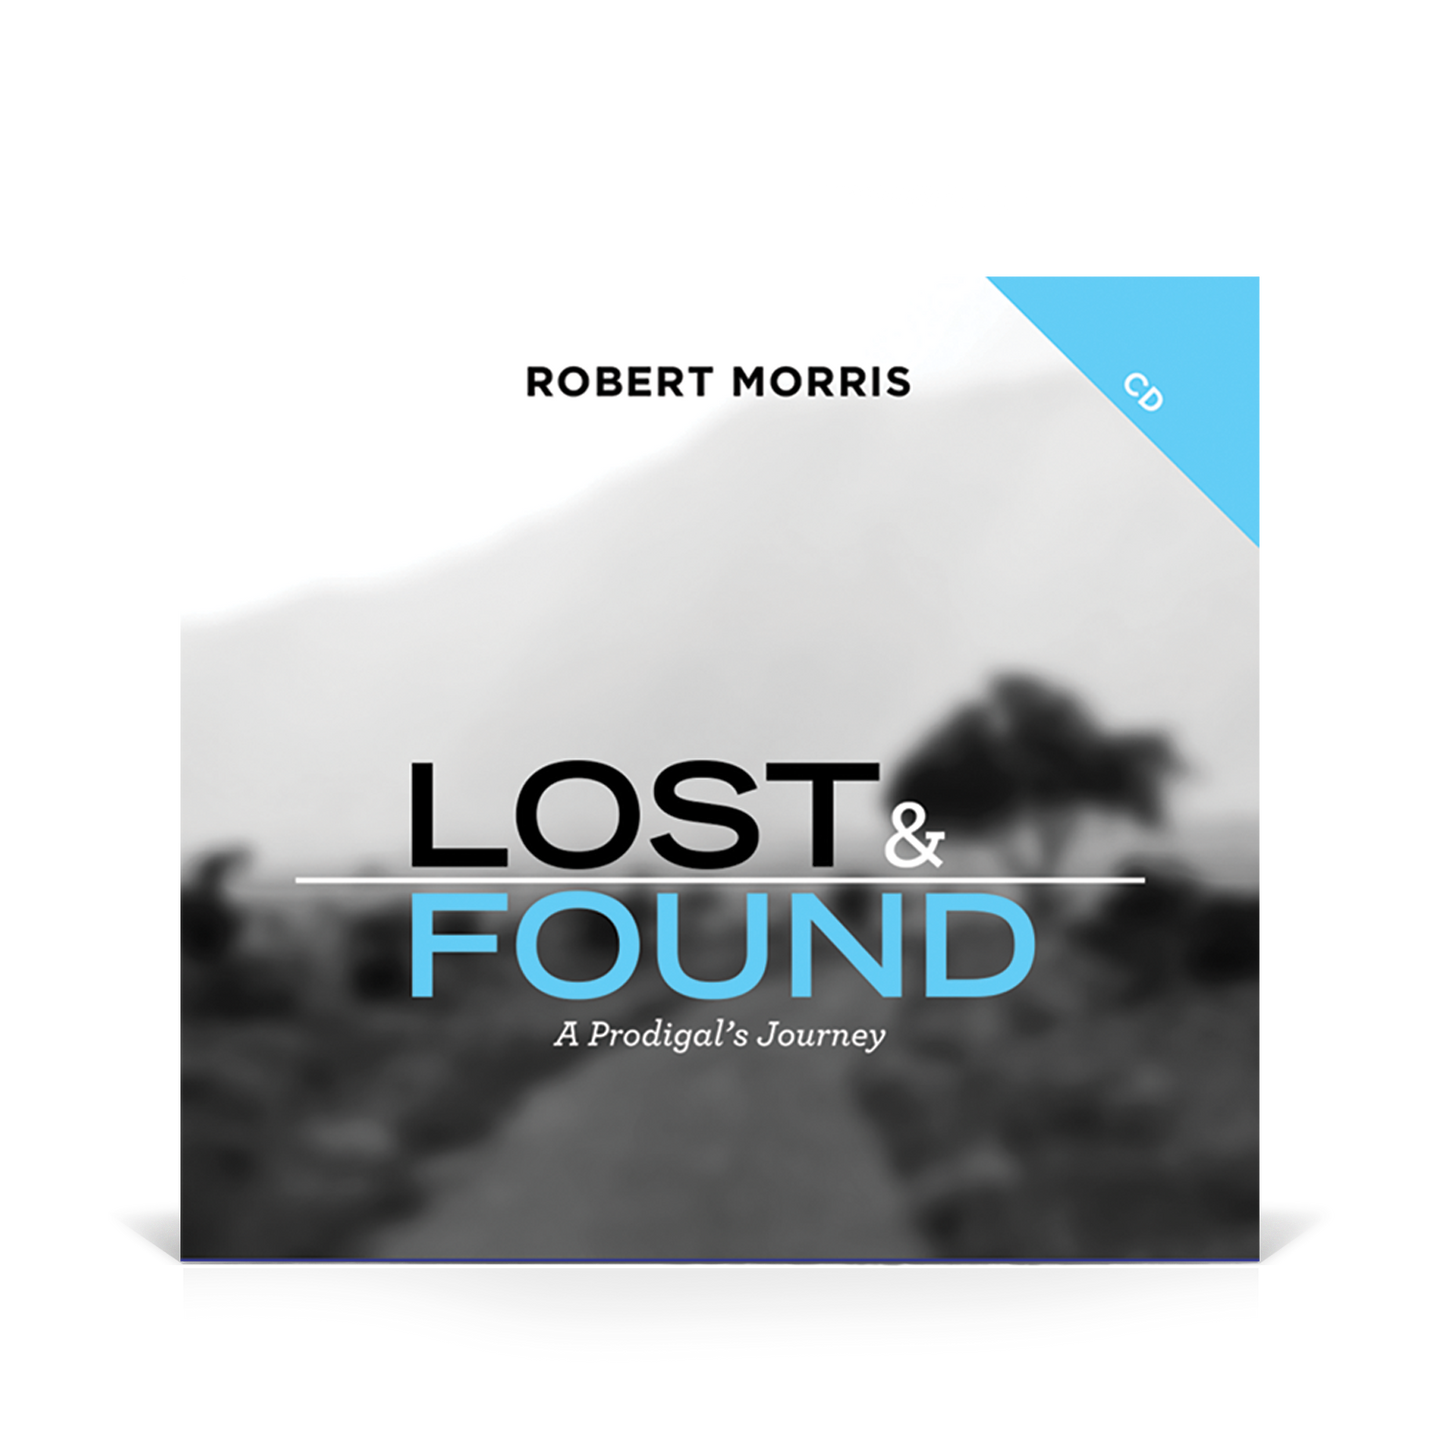 Lost & Found CD